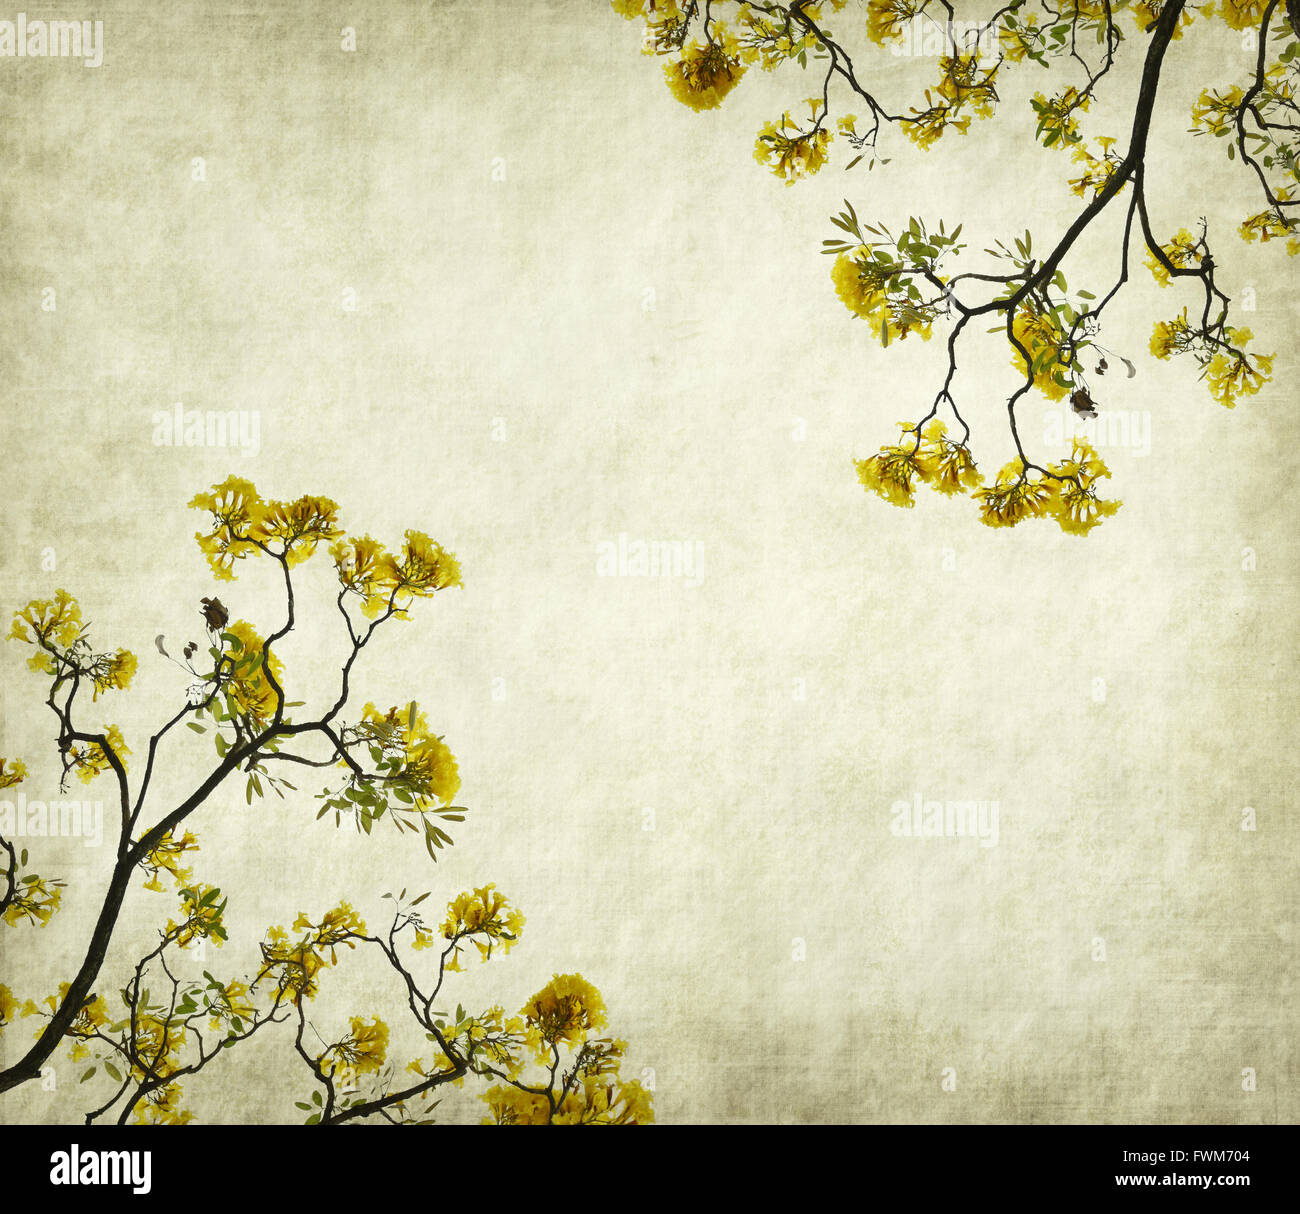 Tabebuia chrysotricha yellow flowers blossom in spring on old paper background Stock Photo